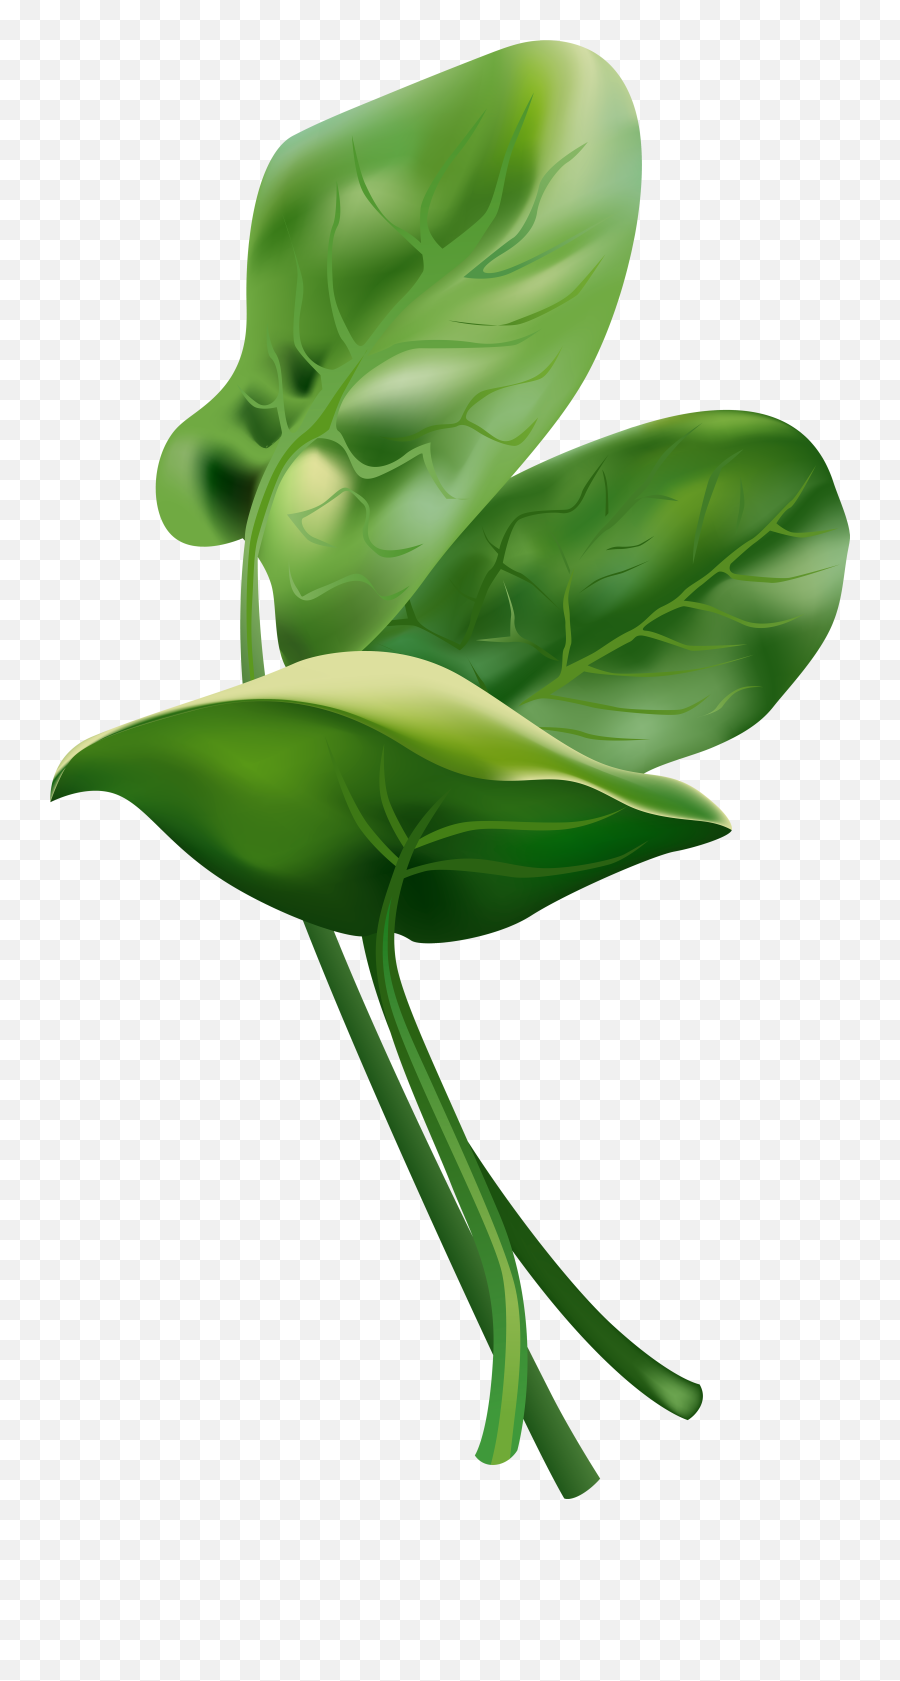 Spinach Free Clip Art Image Gallery - Gallery Yopriceville Vegitables Png,Spinach Png